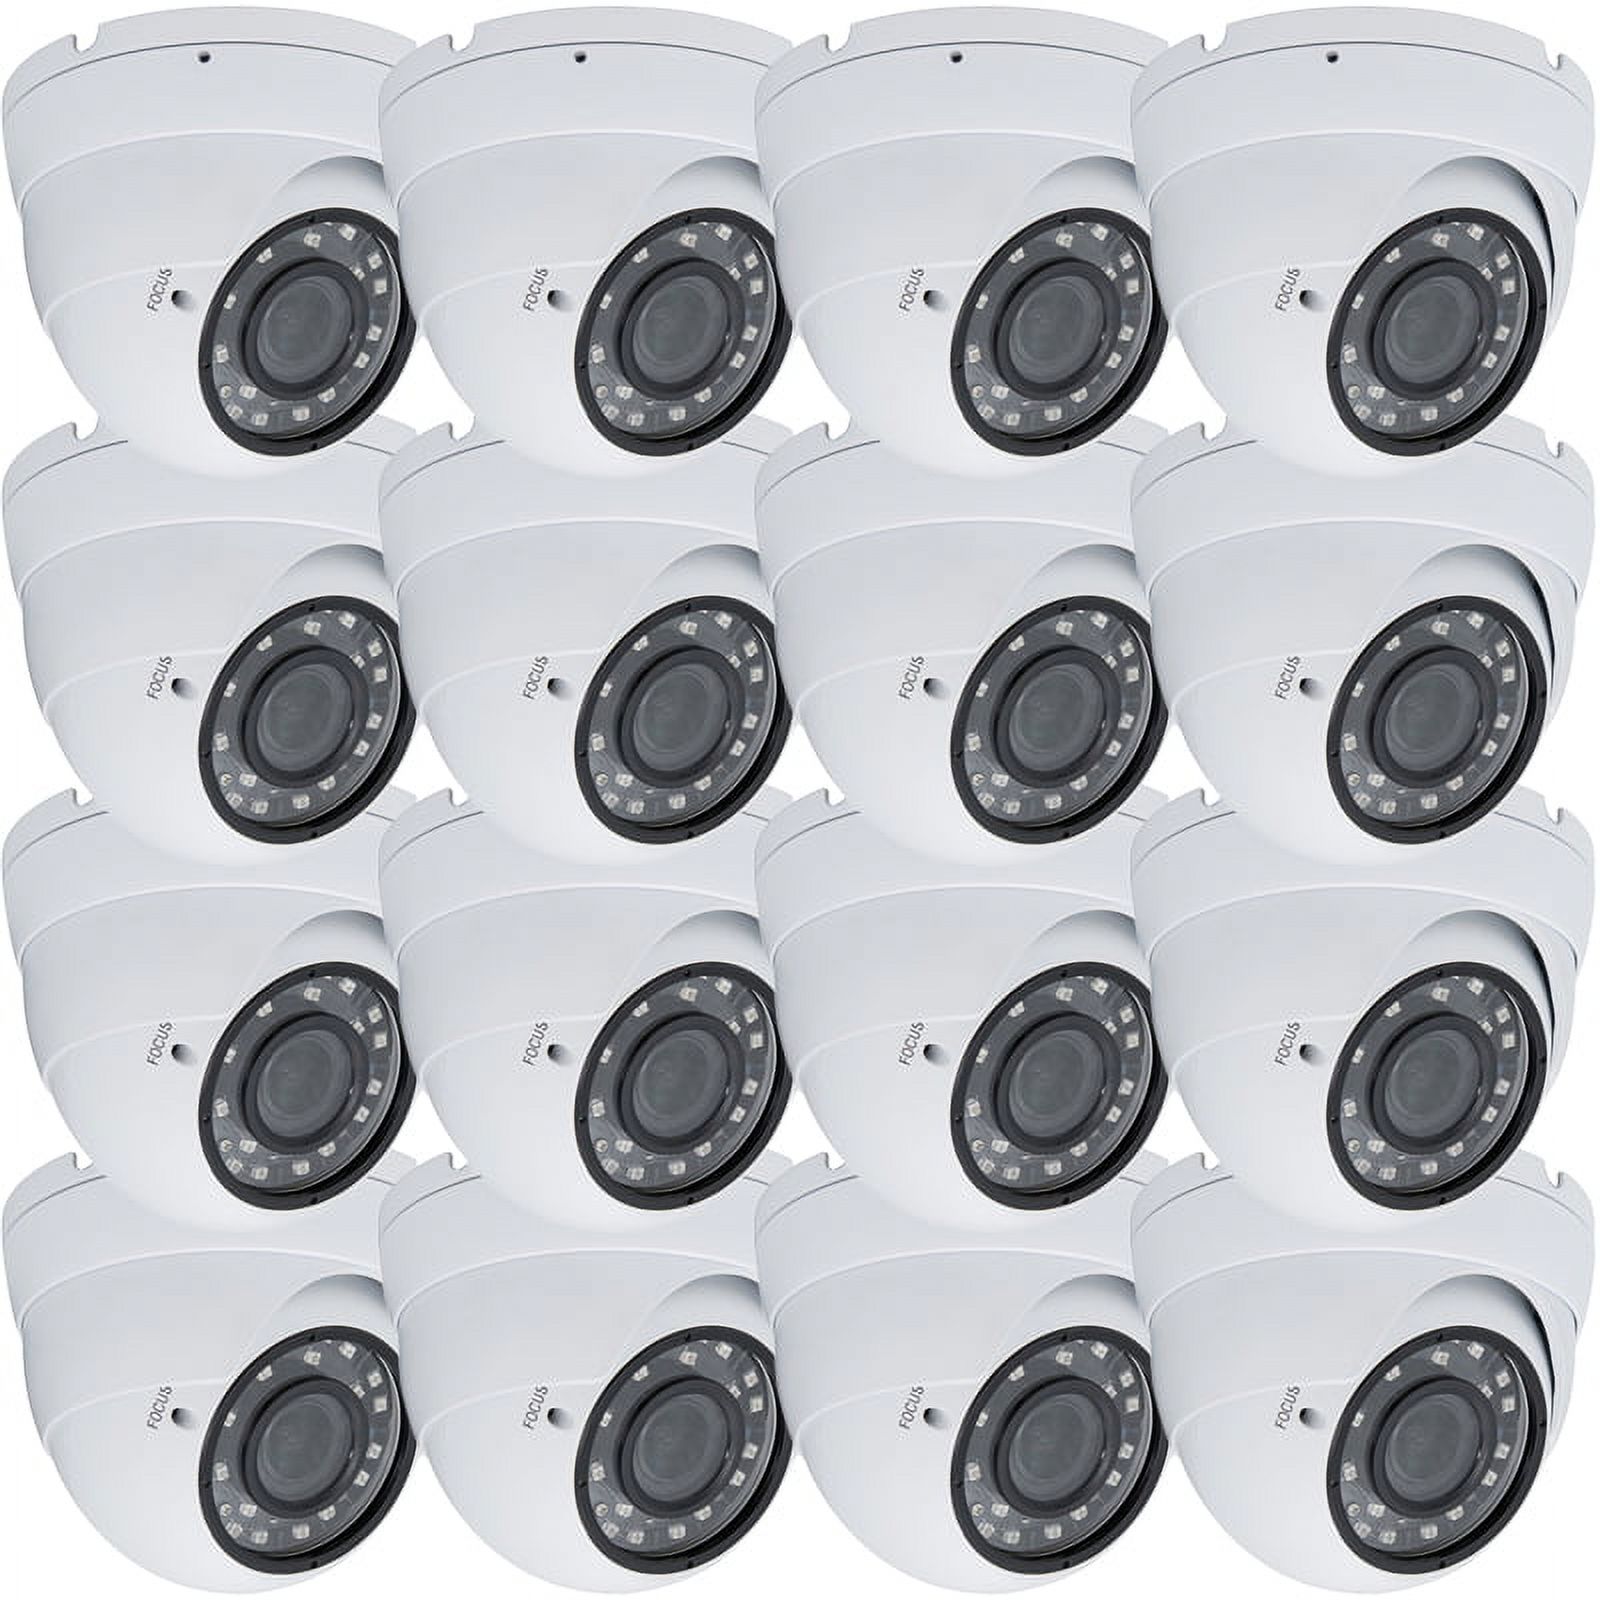 Evertech 1080P High Resolution Indoor Outdoor Security Surveillance Camera Adjustable Vari-Focal Lens 4in1 AHD TVI CVI and Analog Camera - Pack of 16 - image 1 of 6